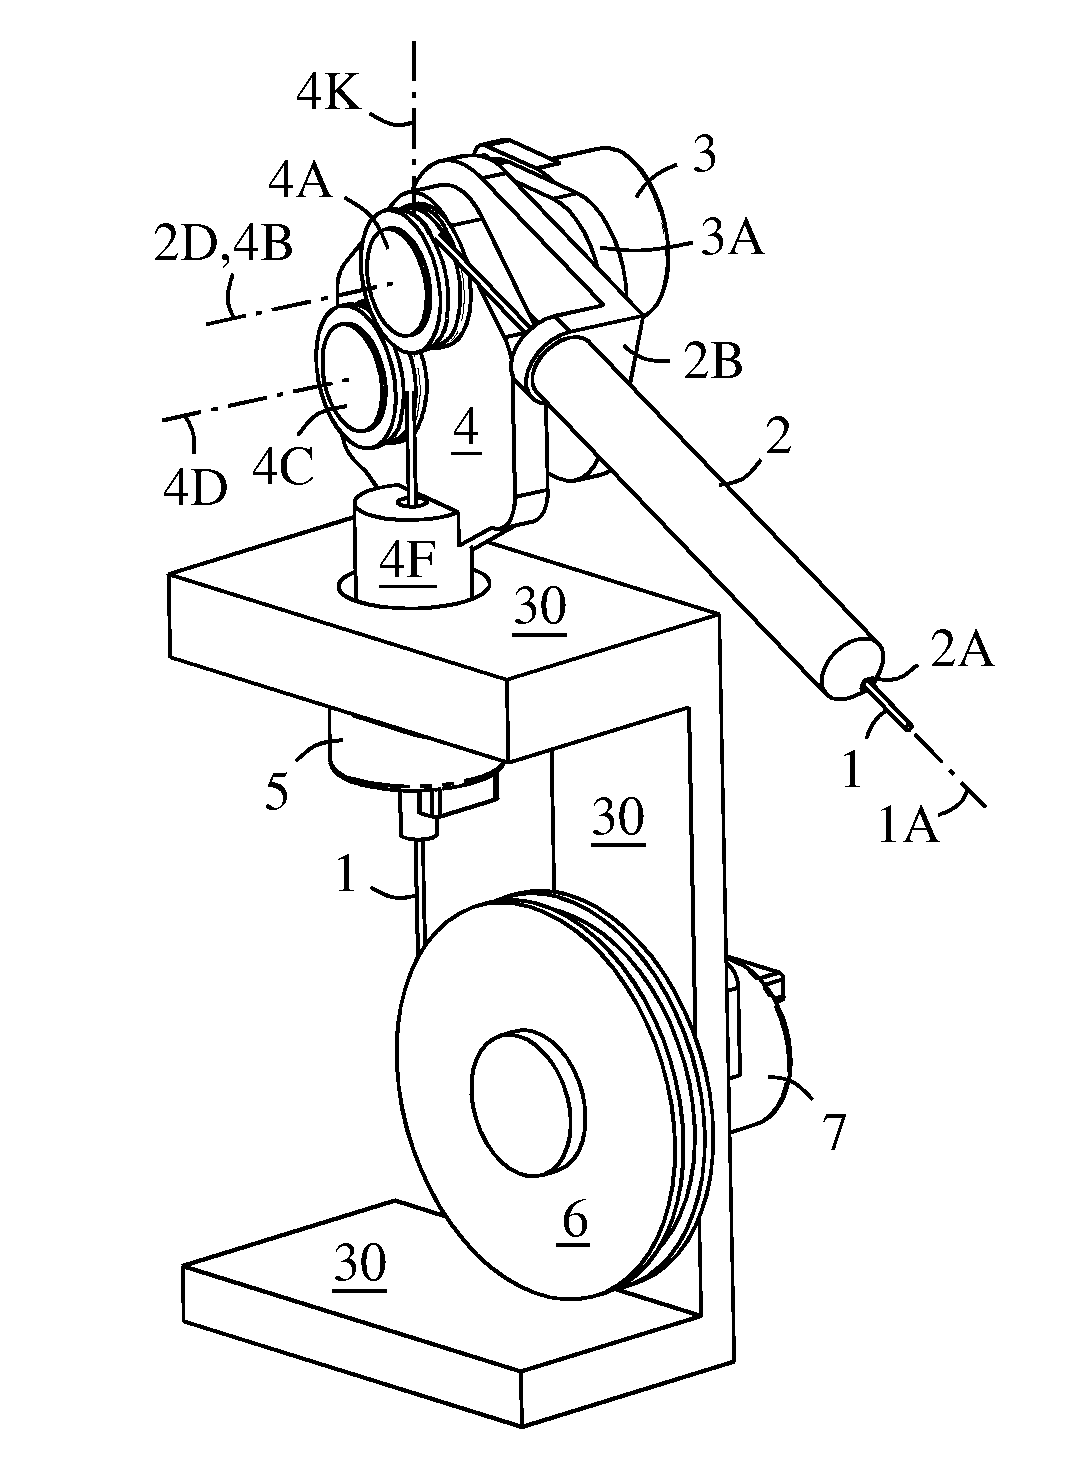 3-dimensional Cable Guide and Cable Based Position Transducer